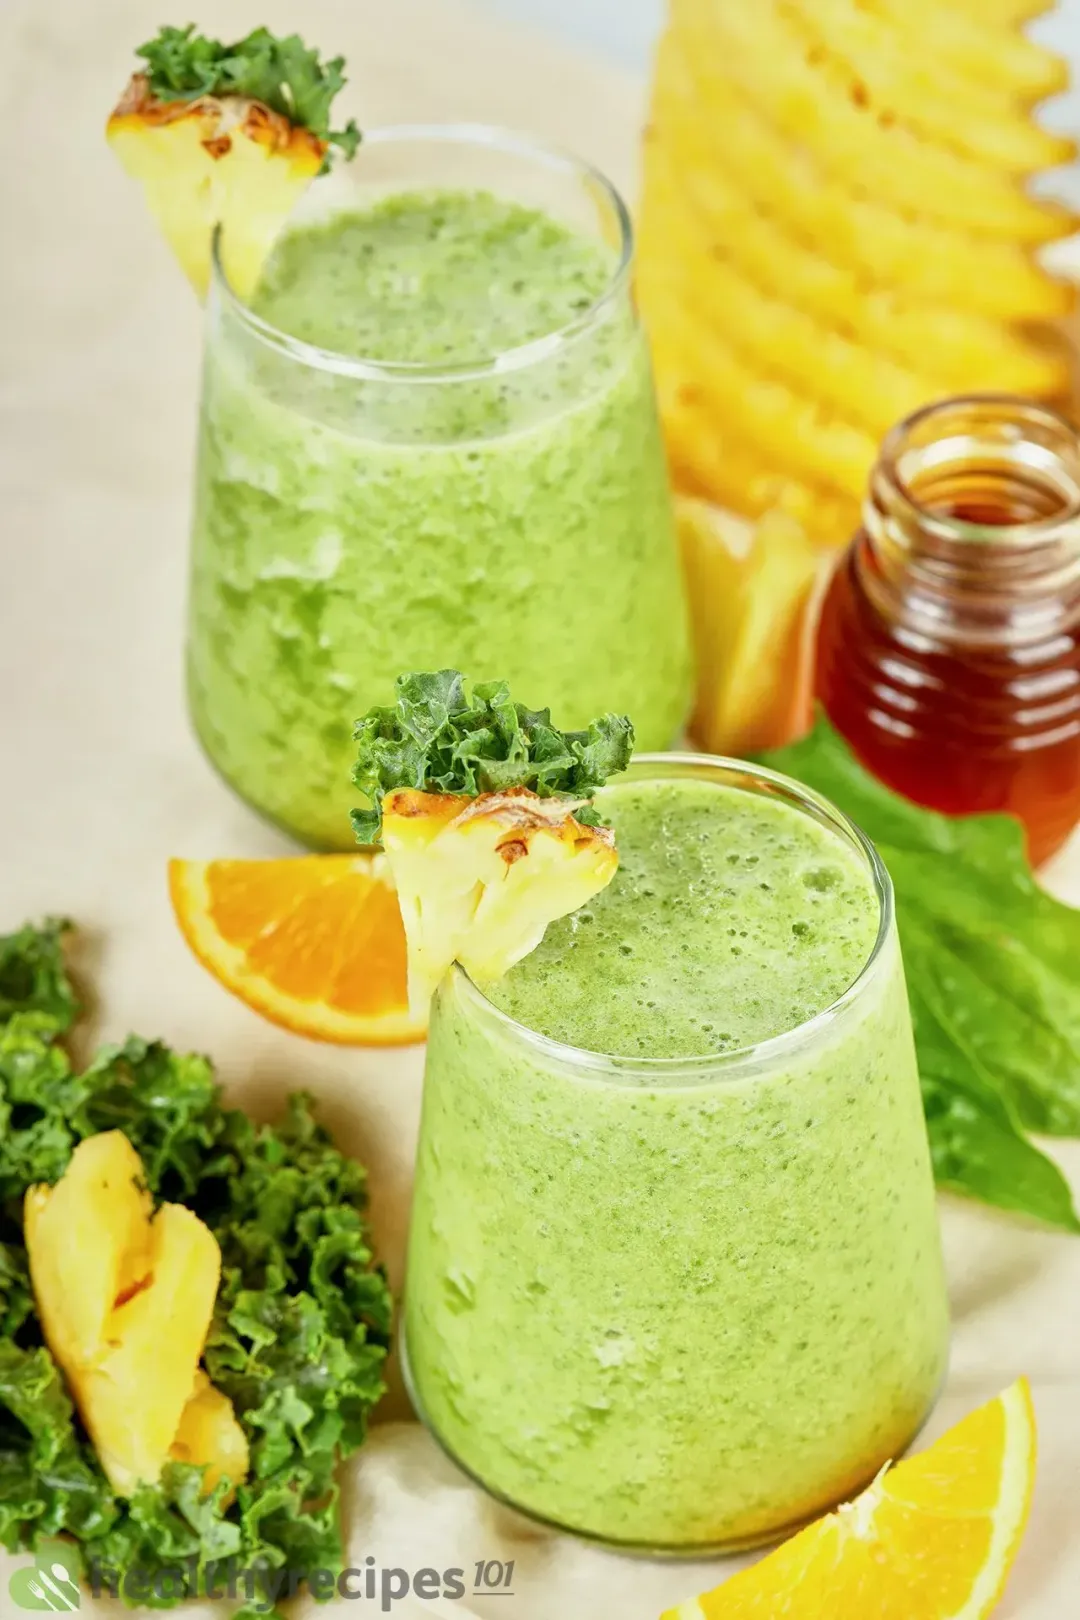 two glasses of pineapple green smoothie with pineapple wedges placed on the rims and surrounded by kale, orange wedges, and other decorants